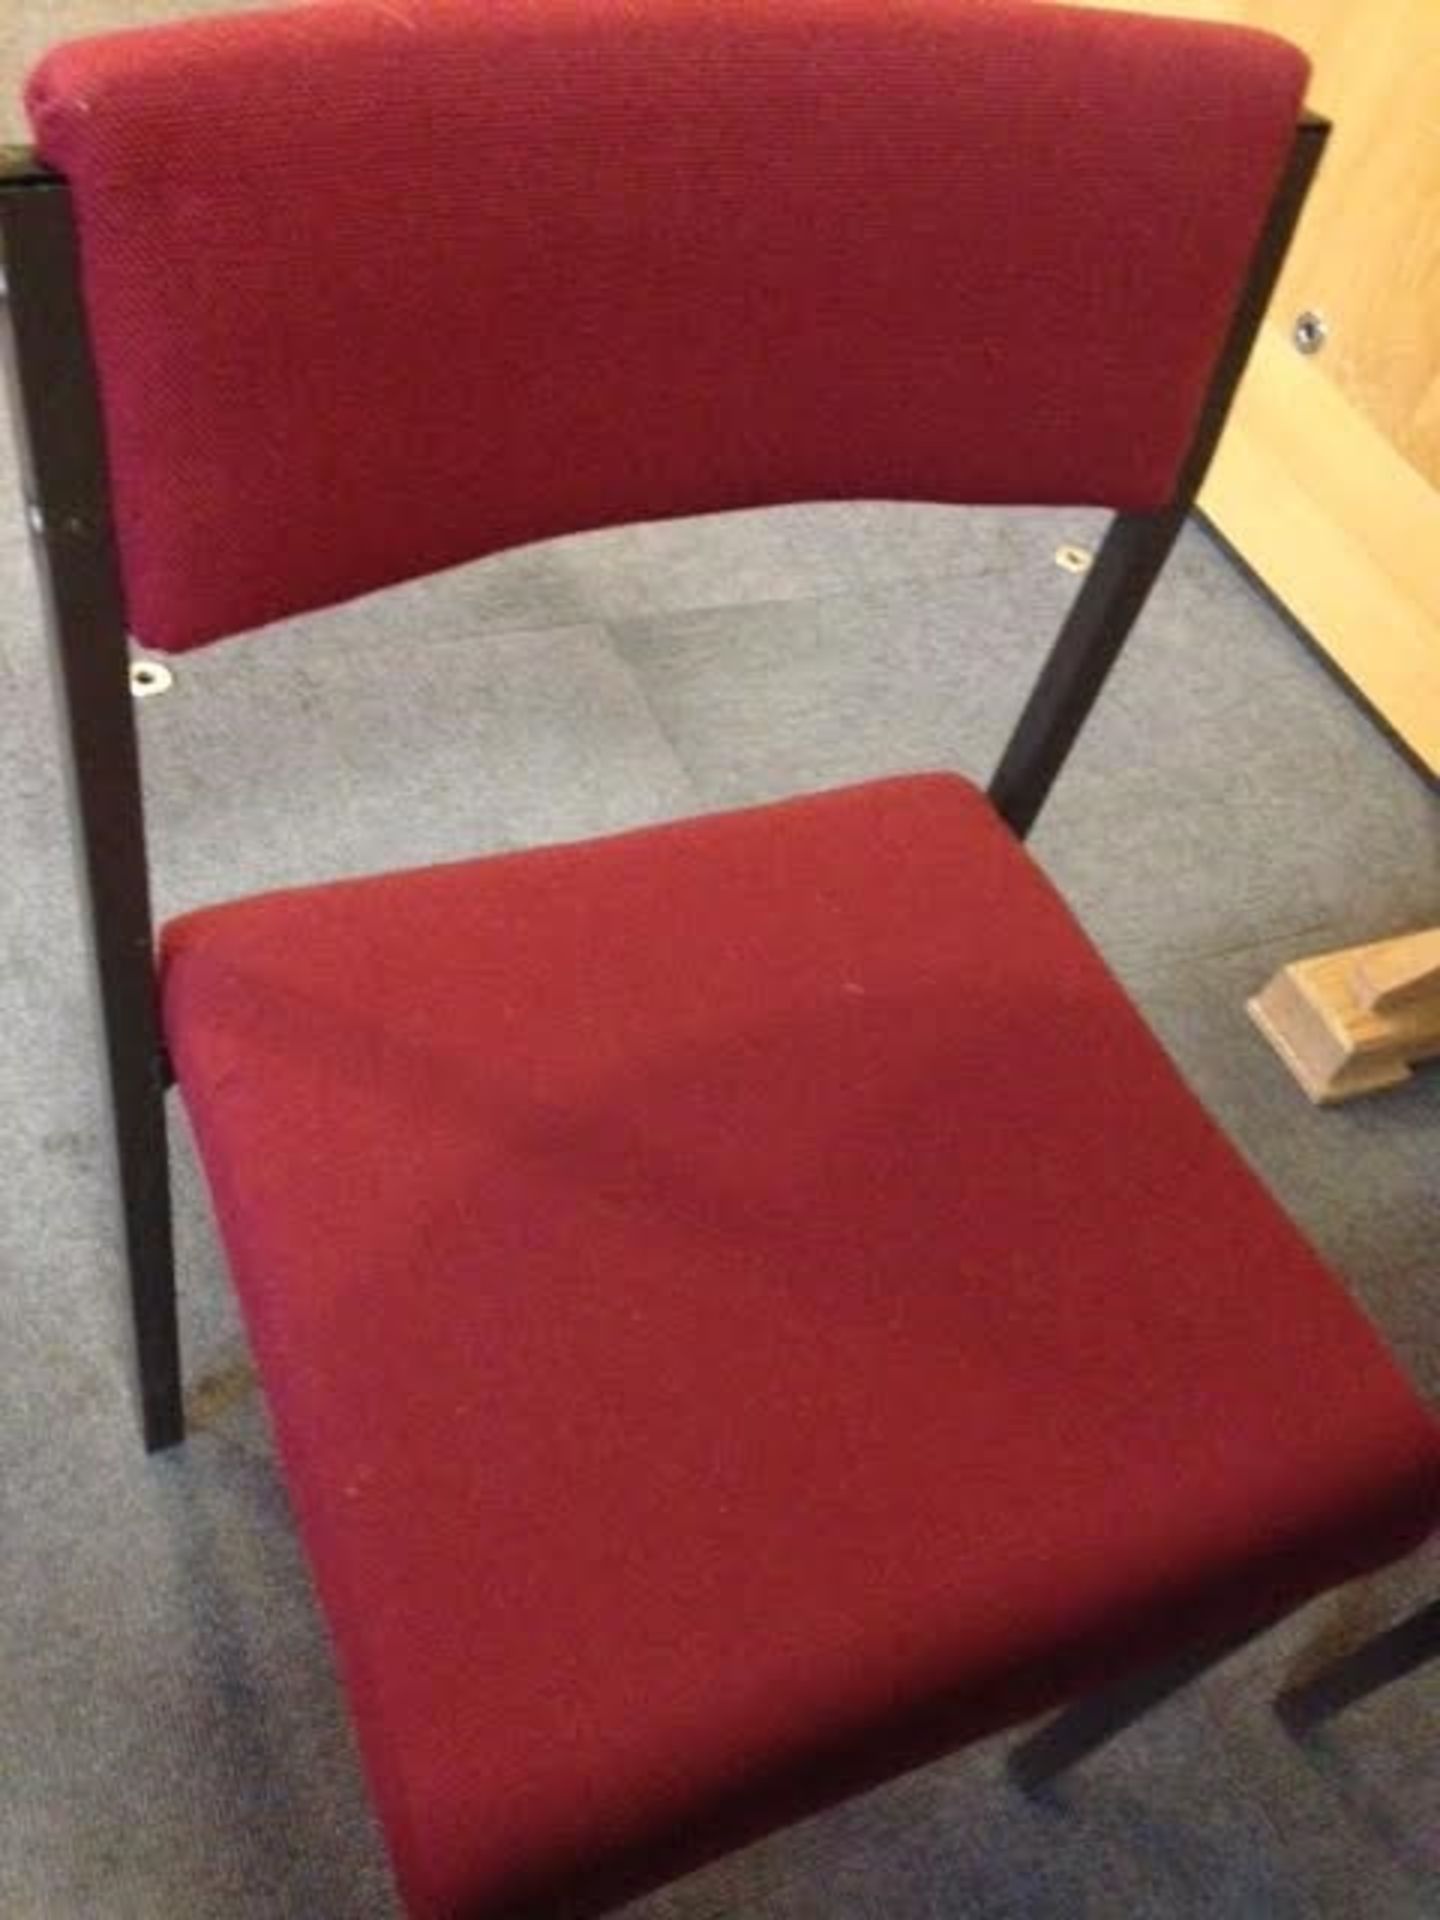 10 x Stacking Chairs - Burgundy Fabric - All In Good Condition - General Purpose Stacking Chairs For - Image 3 of 6